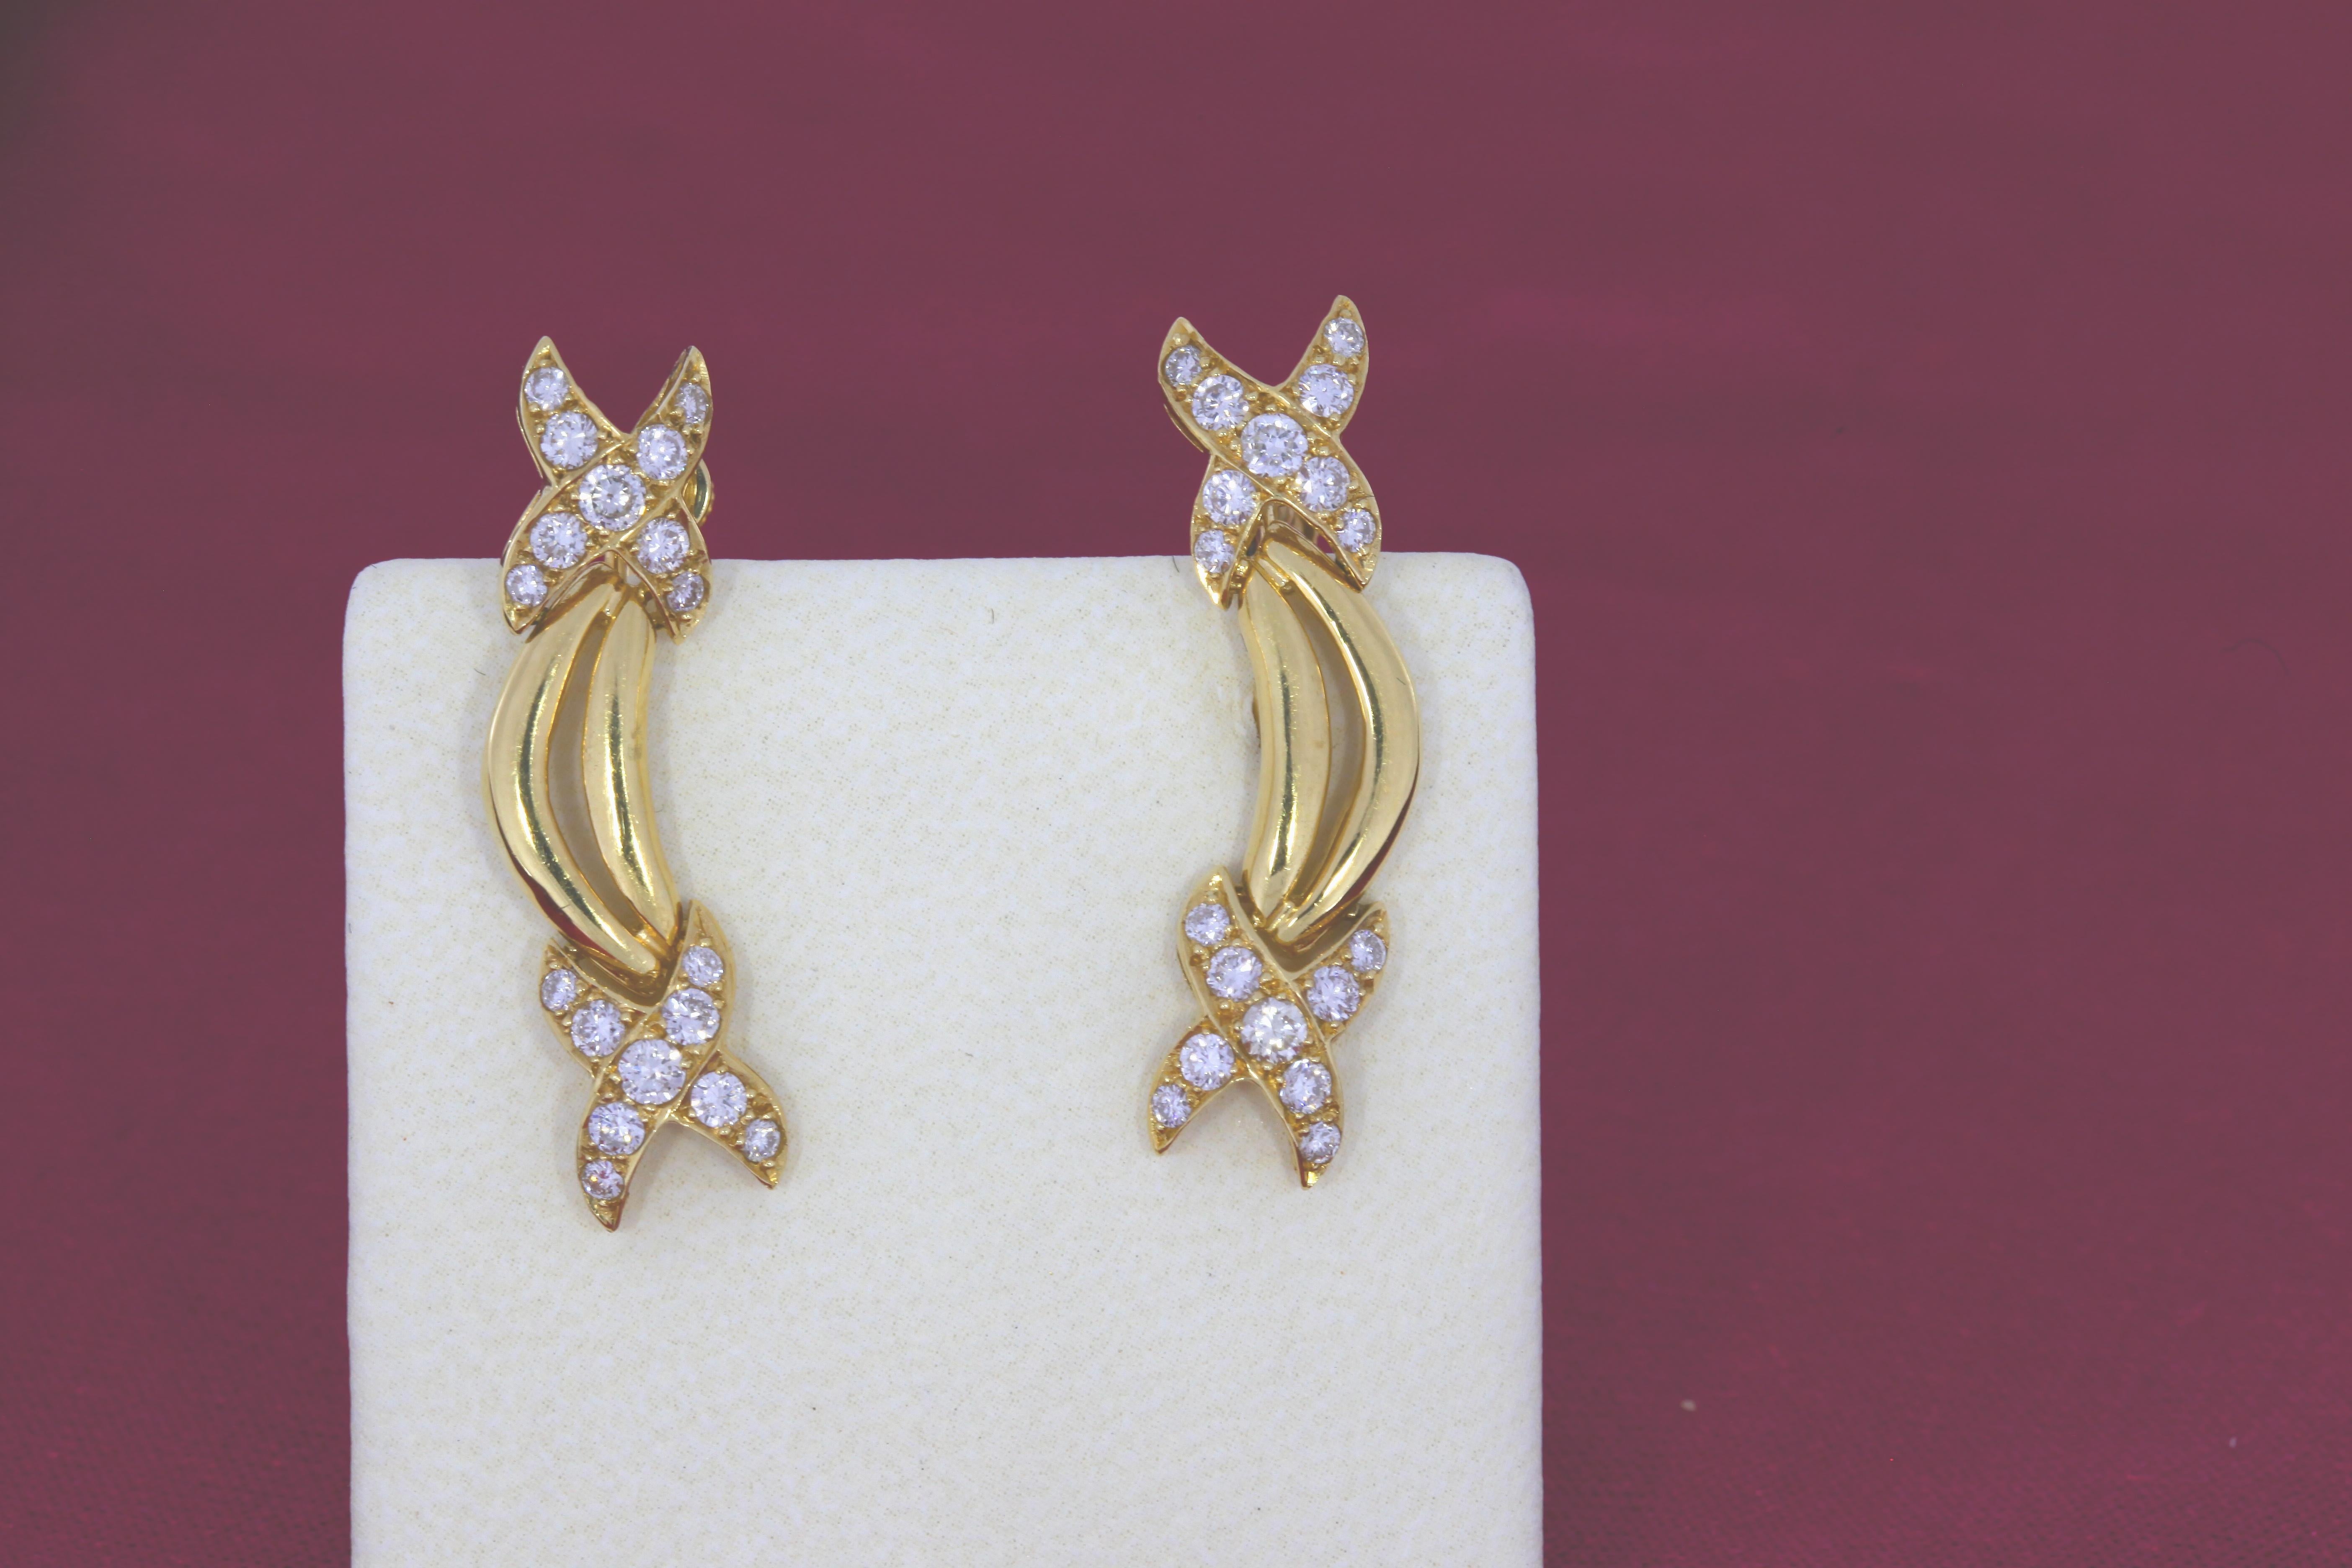 Vintage 18 Karat Gold and Diamond Earrings In Fair Condition For Sale In New York, NY